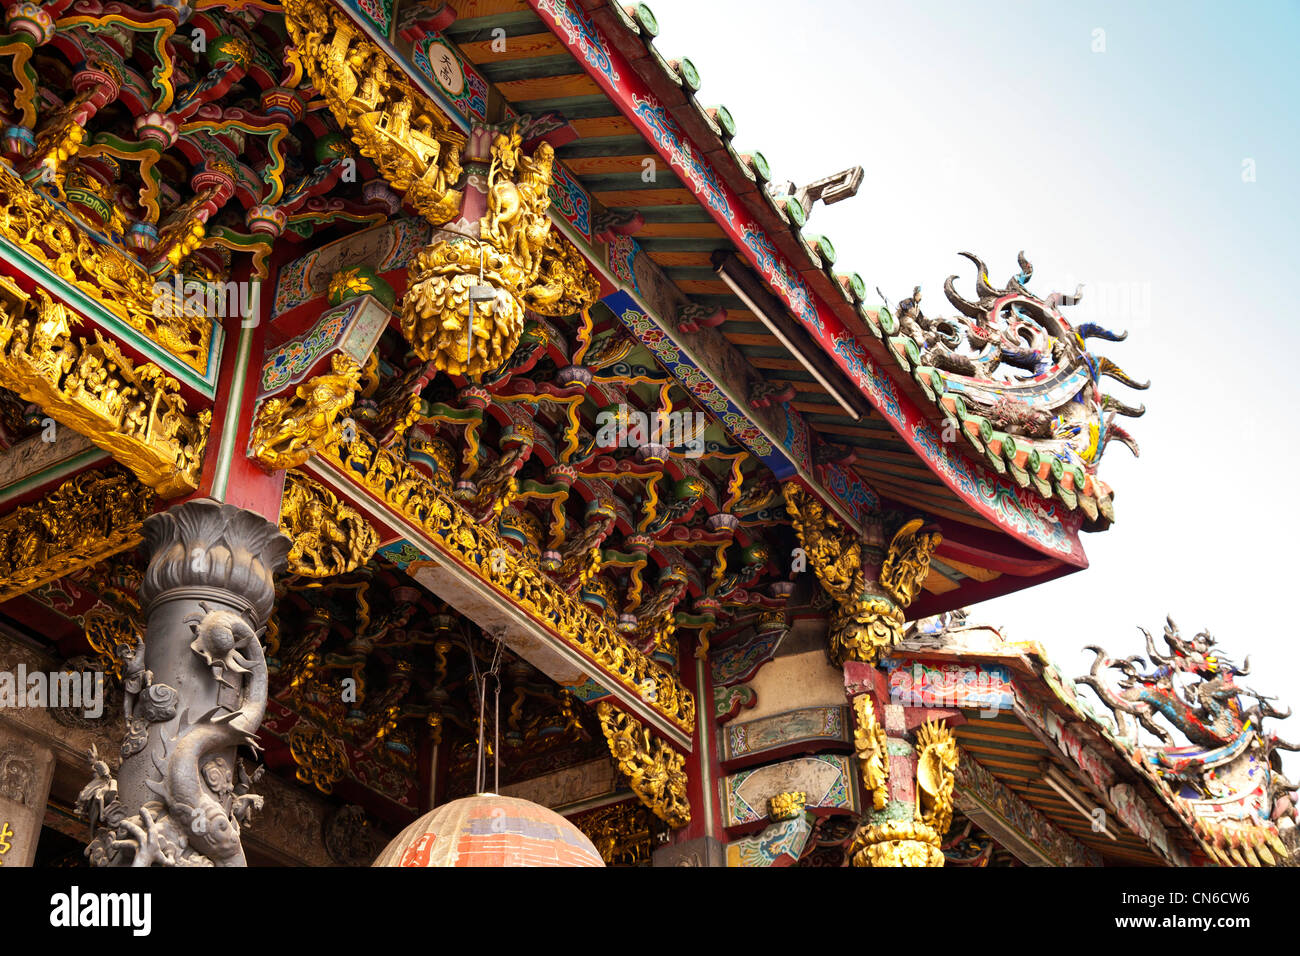 Decorative roof detail at Longshan or Lungshan Temple Taipei Taiwan. JMH5685 Stock Photo